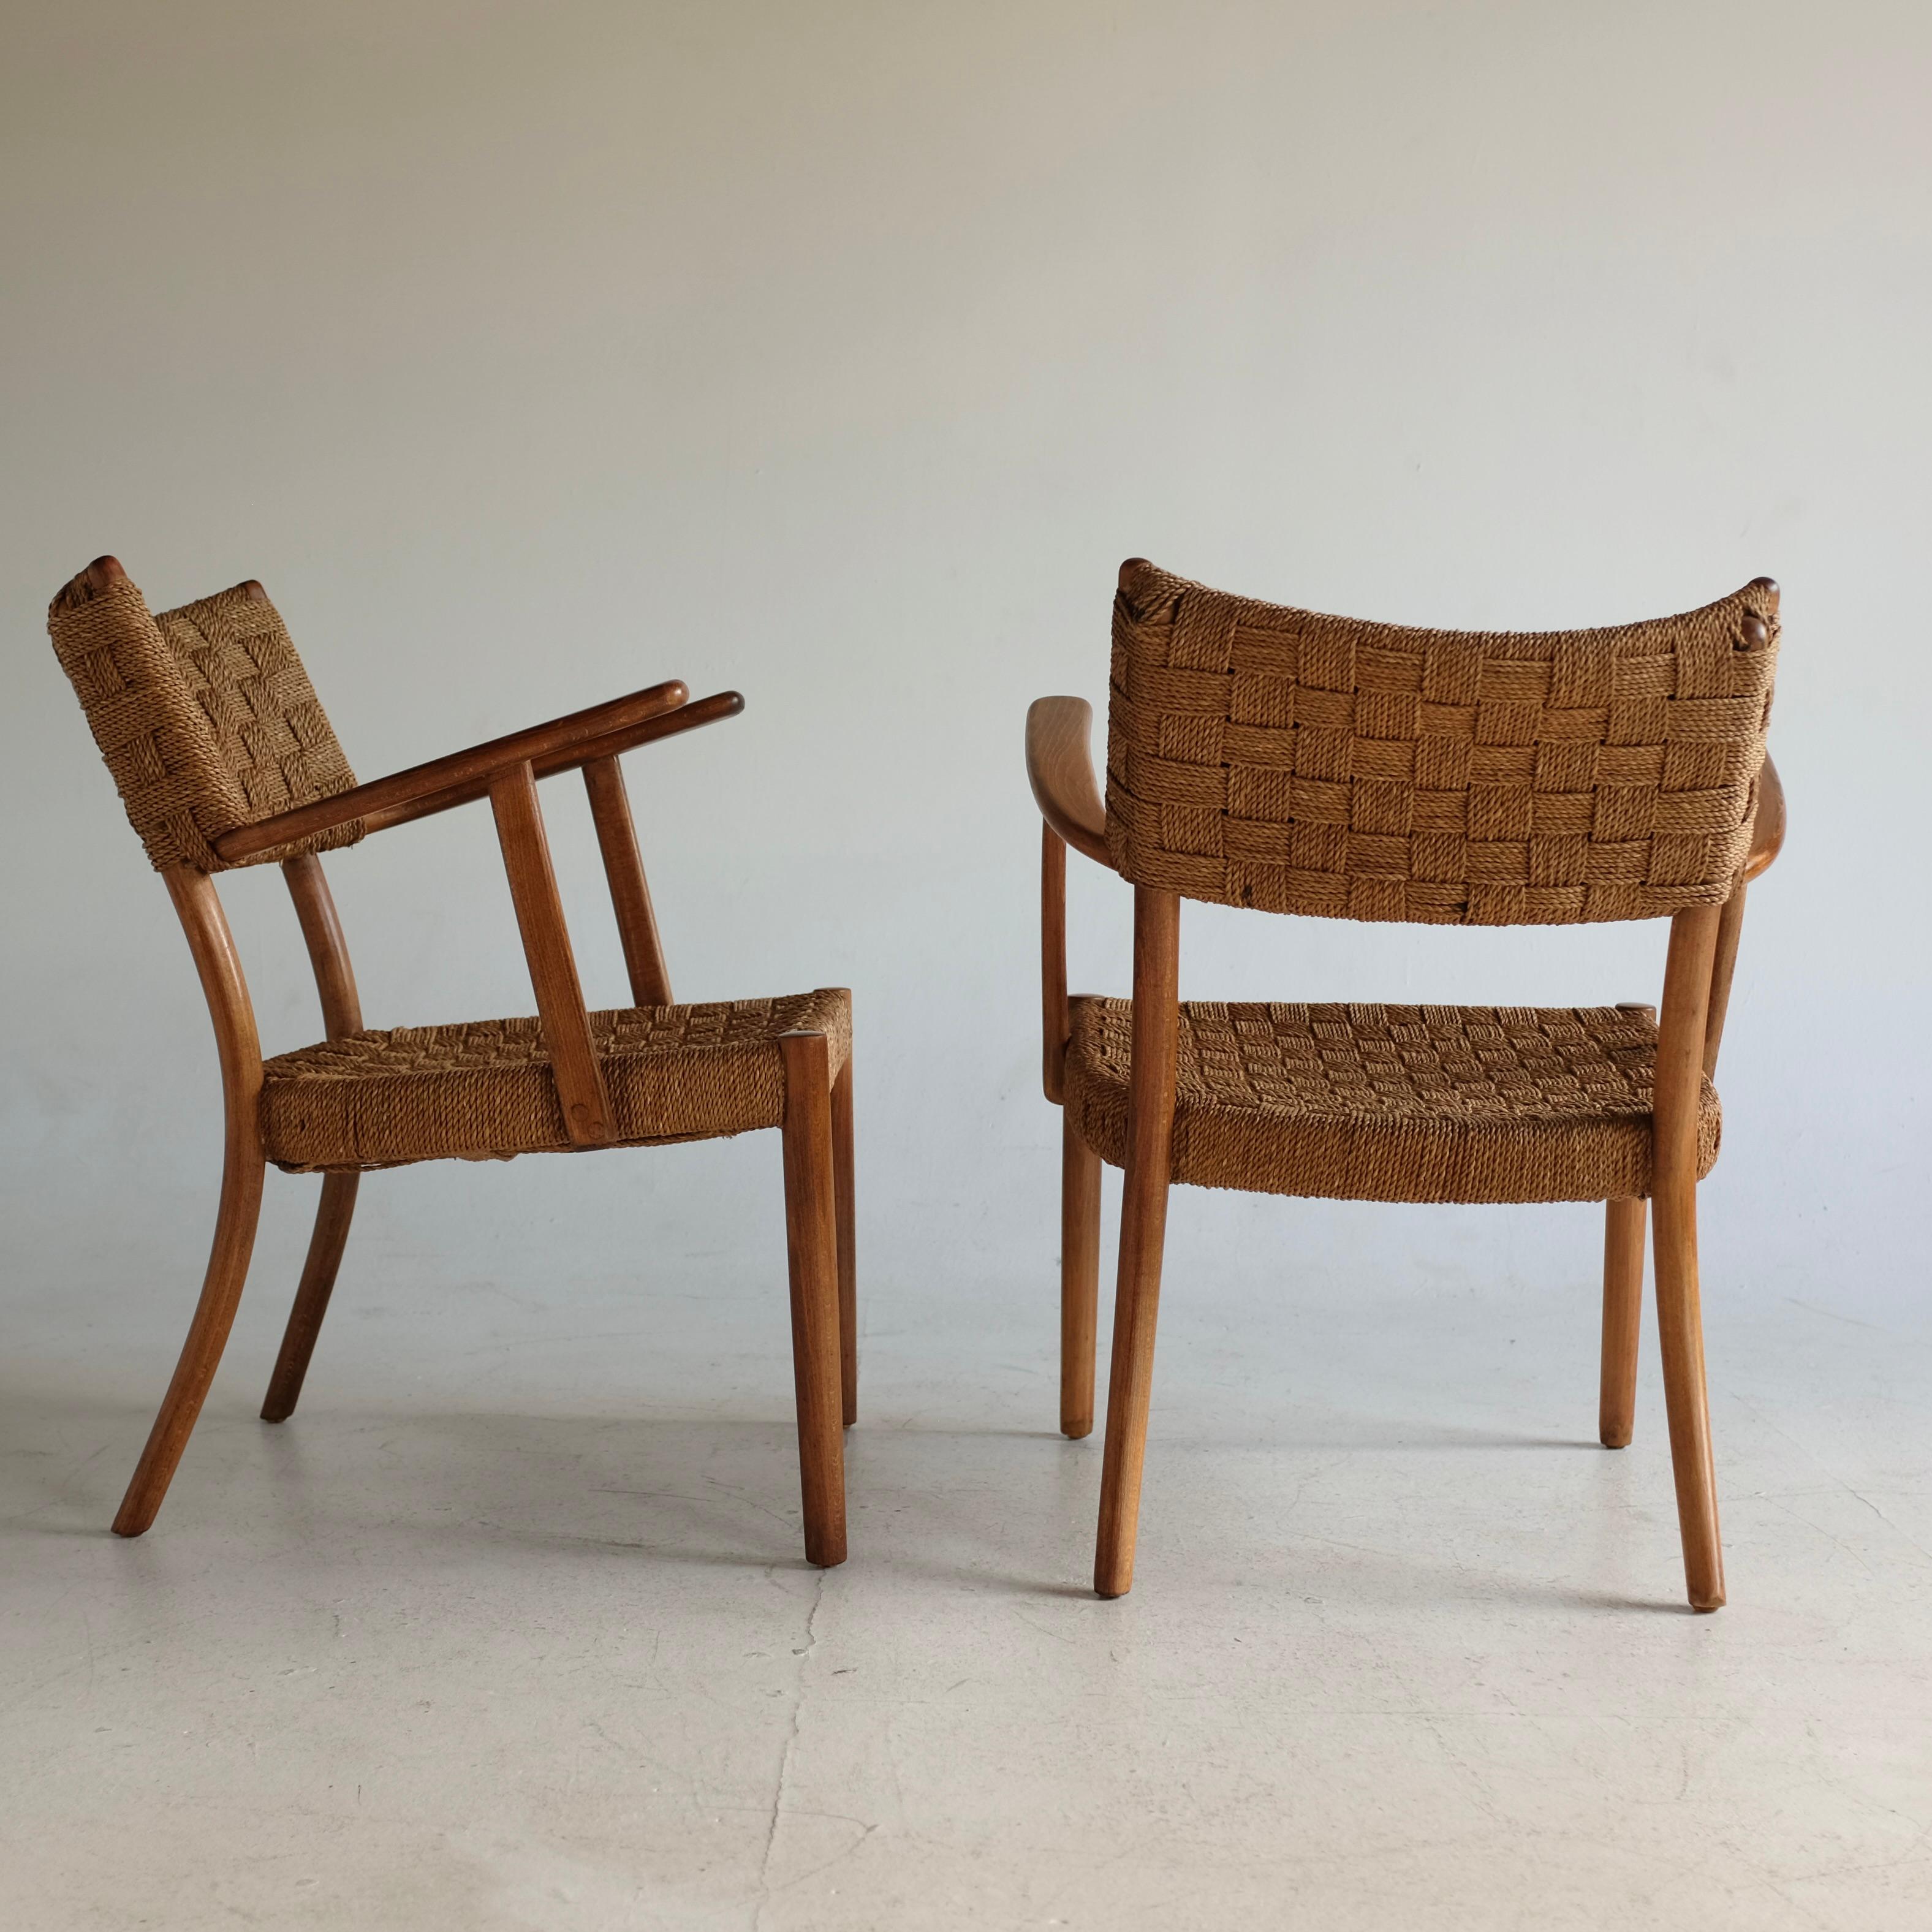 Beatiful pair of 1930's Rope chair Model 1570 by Karl Schrøder for Fritz Hansen. Beautiful woven papercord on the back and seat with beech frame. The frame has been restored and the cord is in very good condition with a couple of wear and tear from